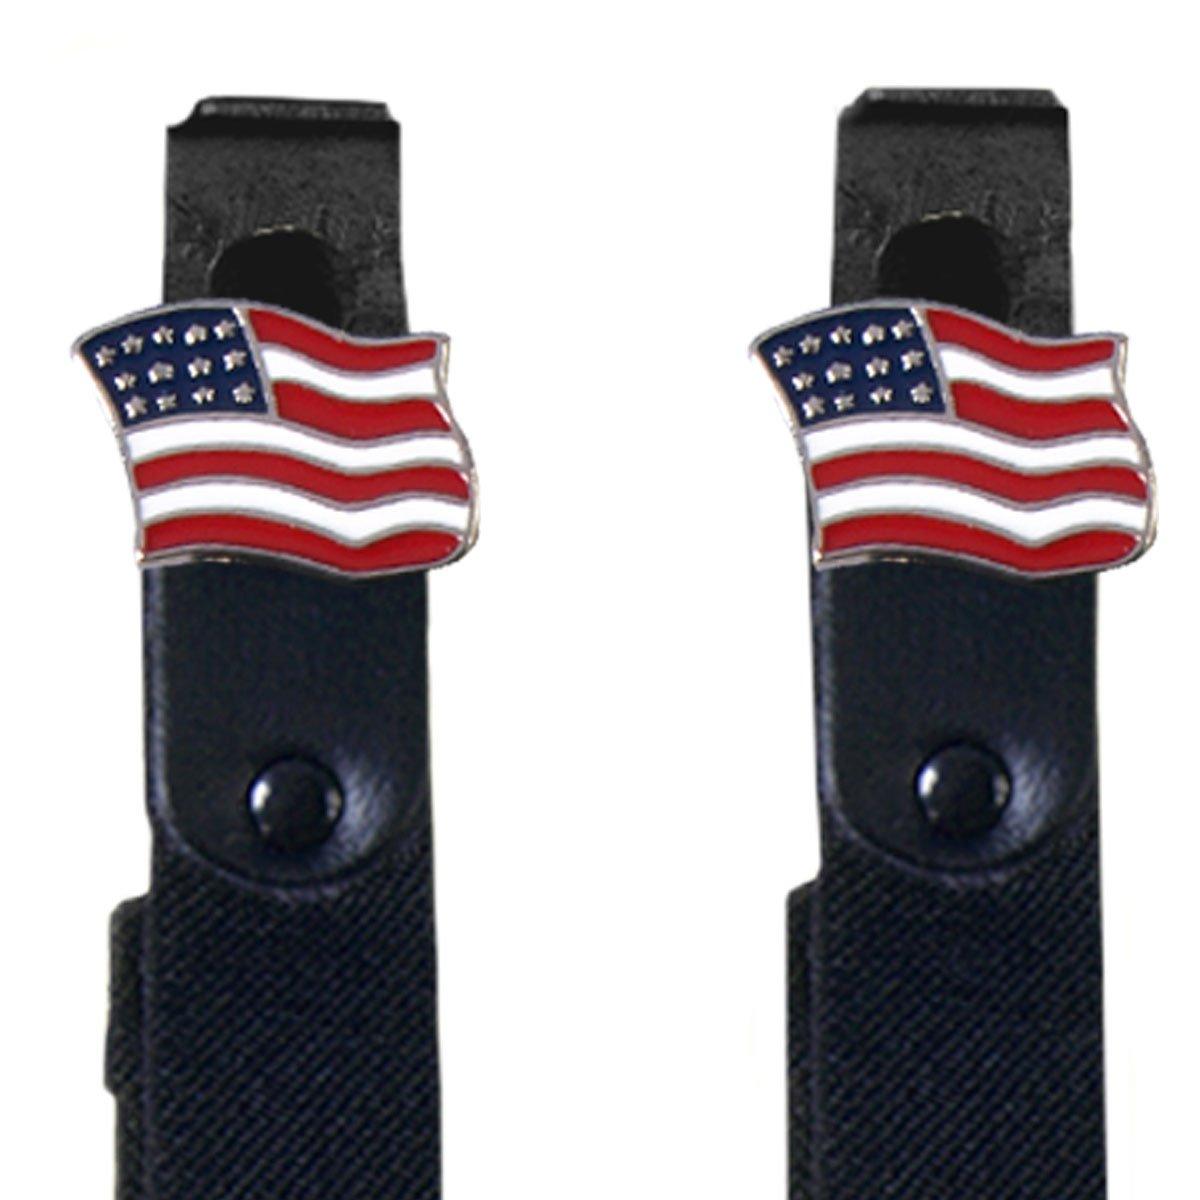 Hot Leathers American Flag Motorcycle Riding Pant Clips - American Legend Rider